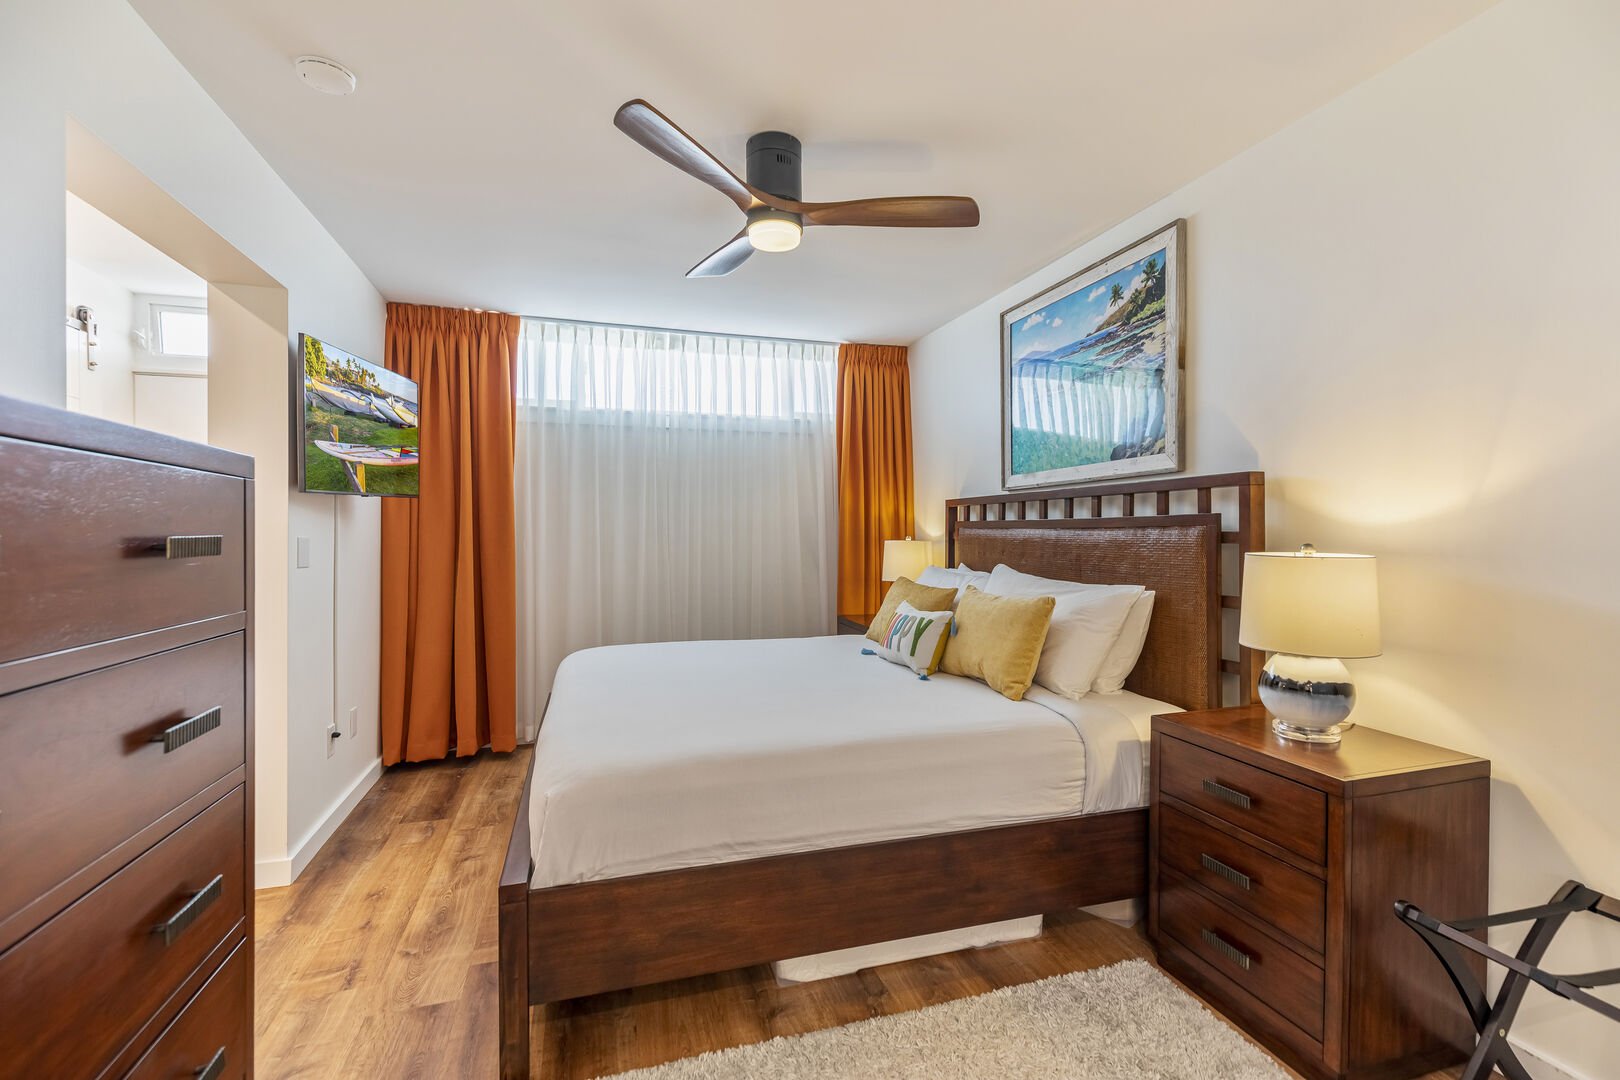 Master bedroom with split AC and ceiling fan